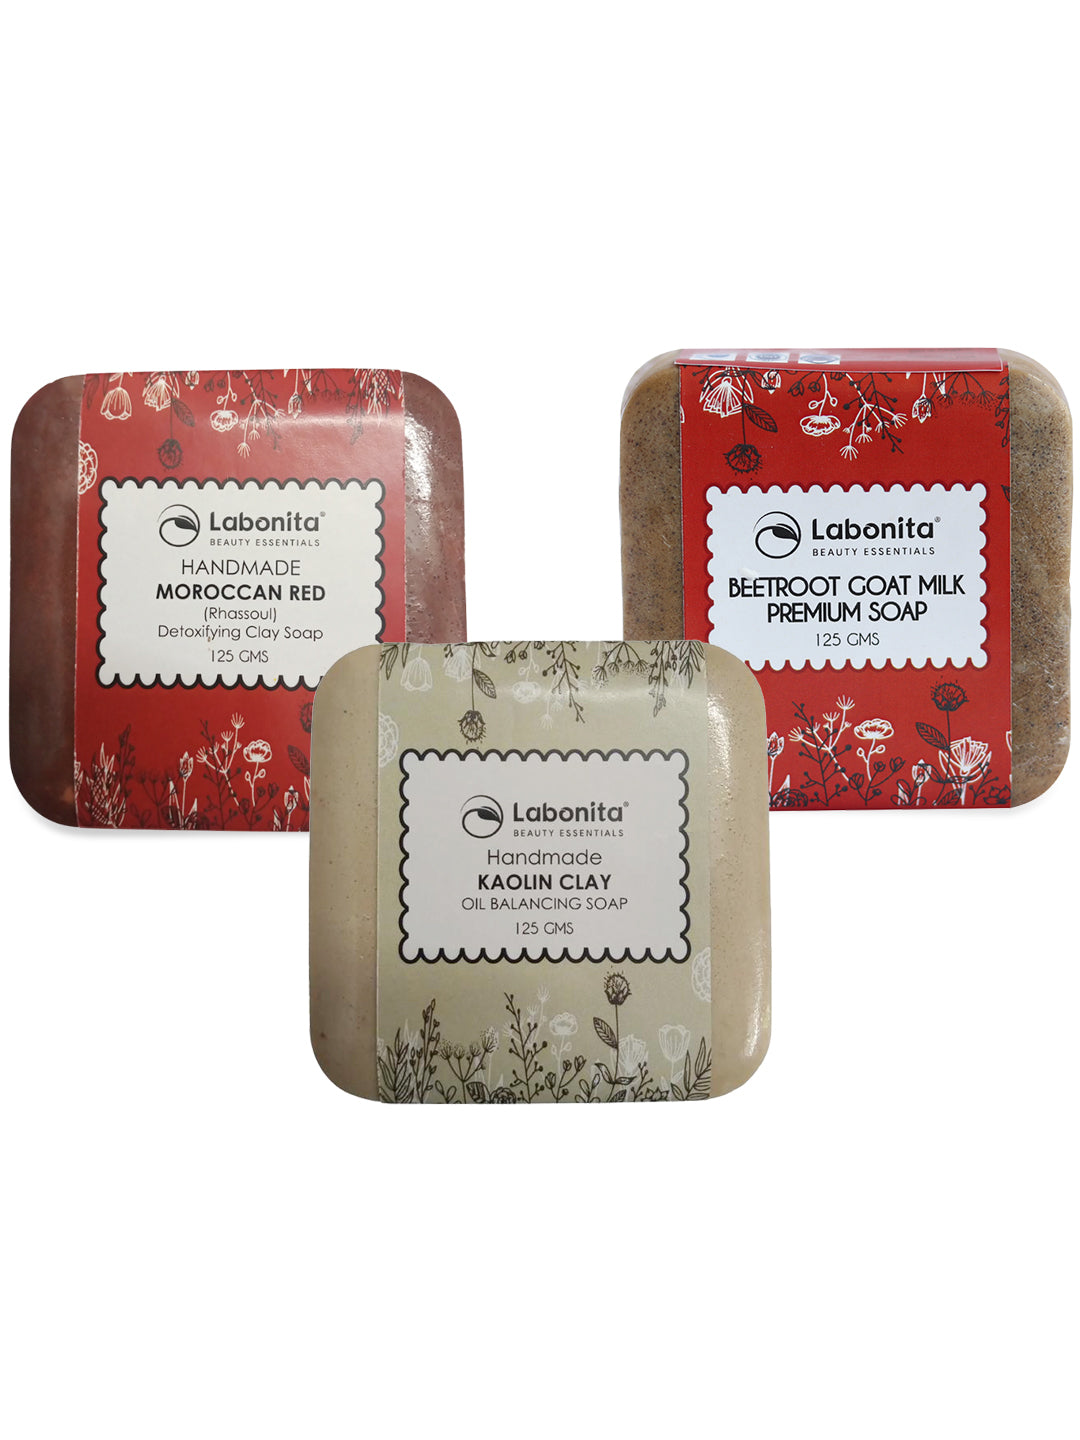 Blemishes Pigmentation Oily to Combination Soap Combo Pack of Moroccan Red Clay, Beetroot Goat Milk, Kaolin Clay Soap